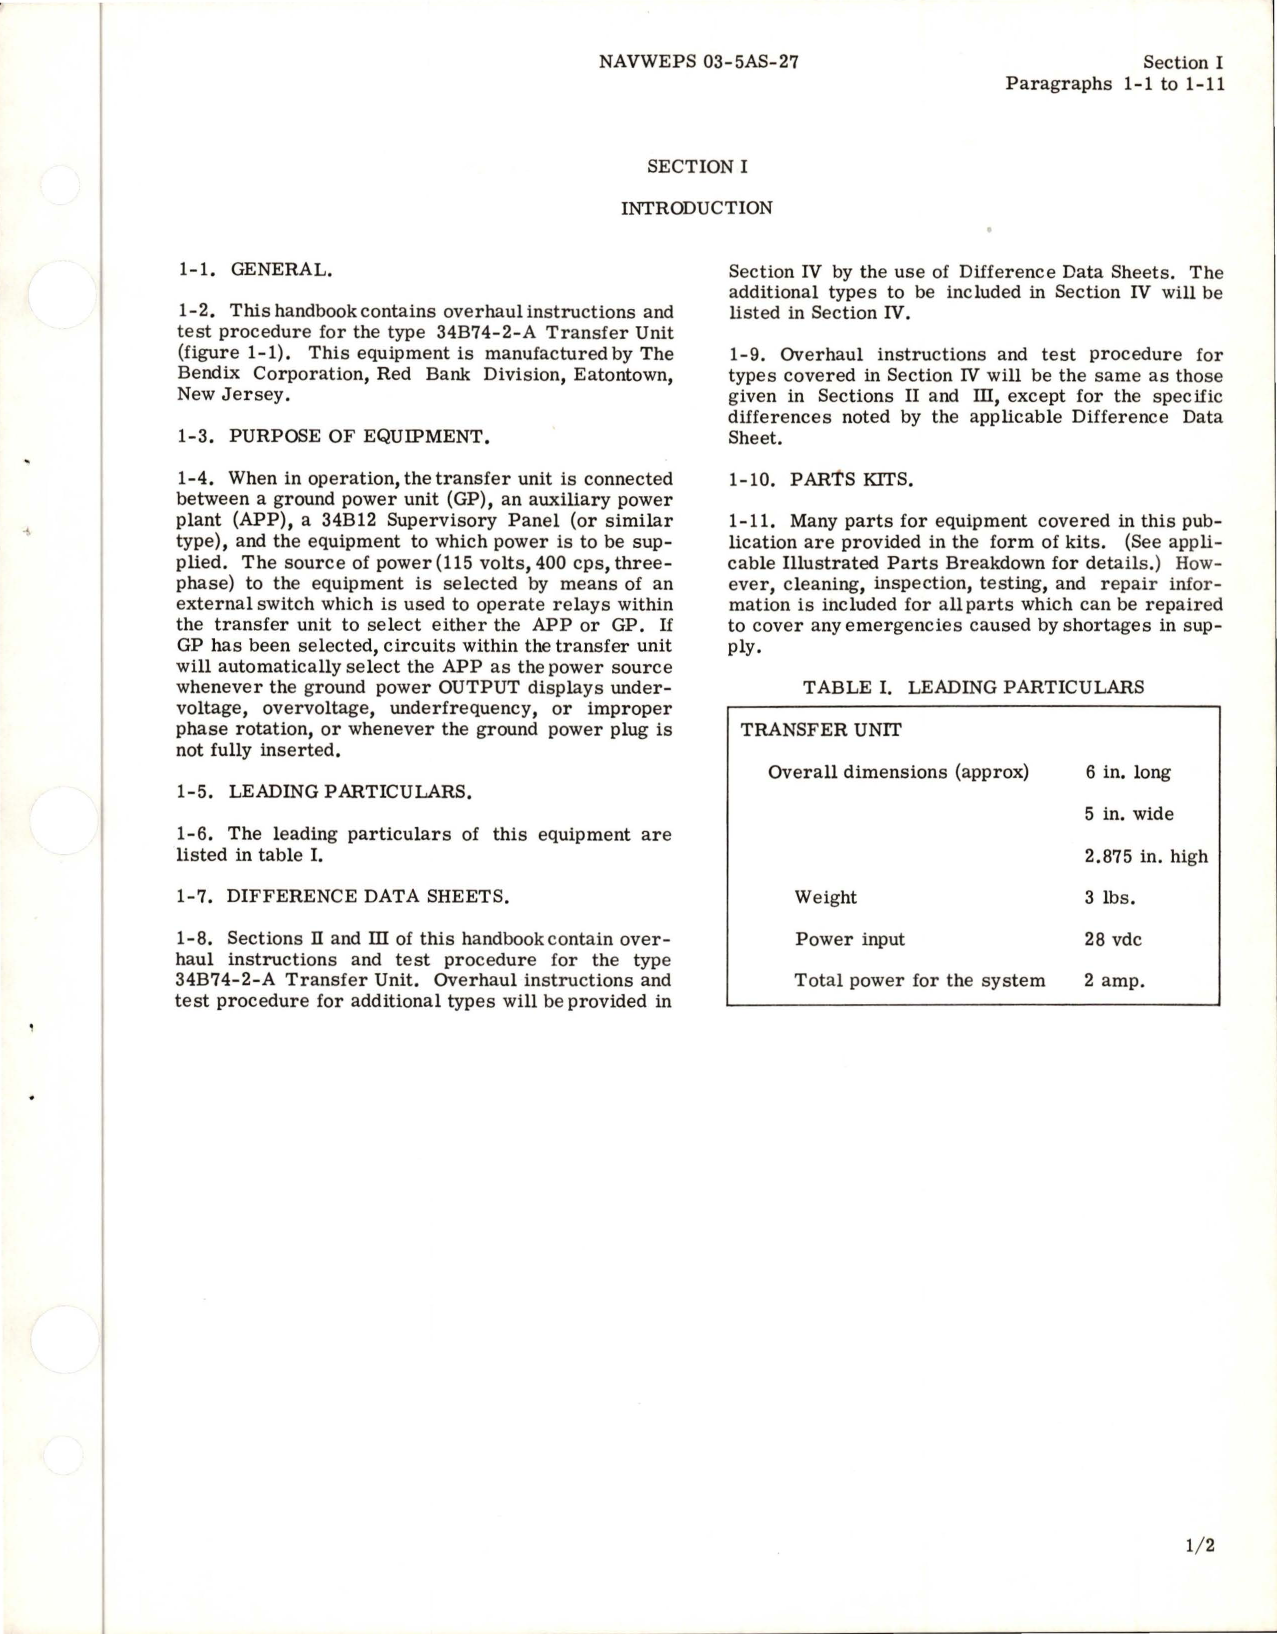 Sample page 5 from AirCorps Library document: Overhaul Instructions for Transfer Unit - Part 34B74-2-A